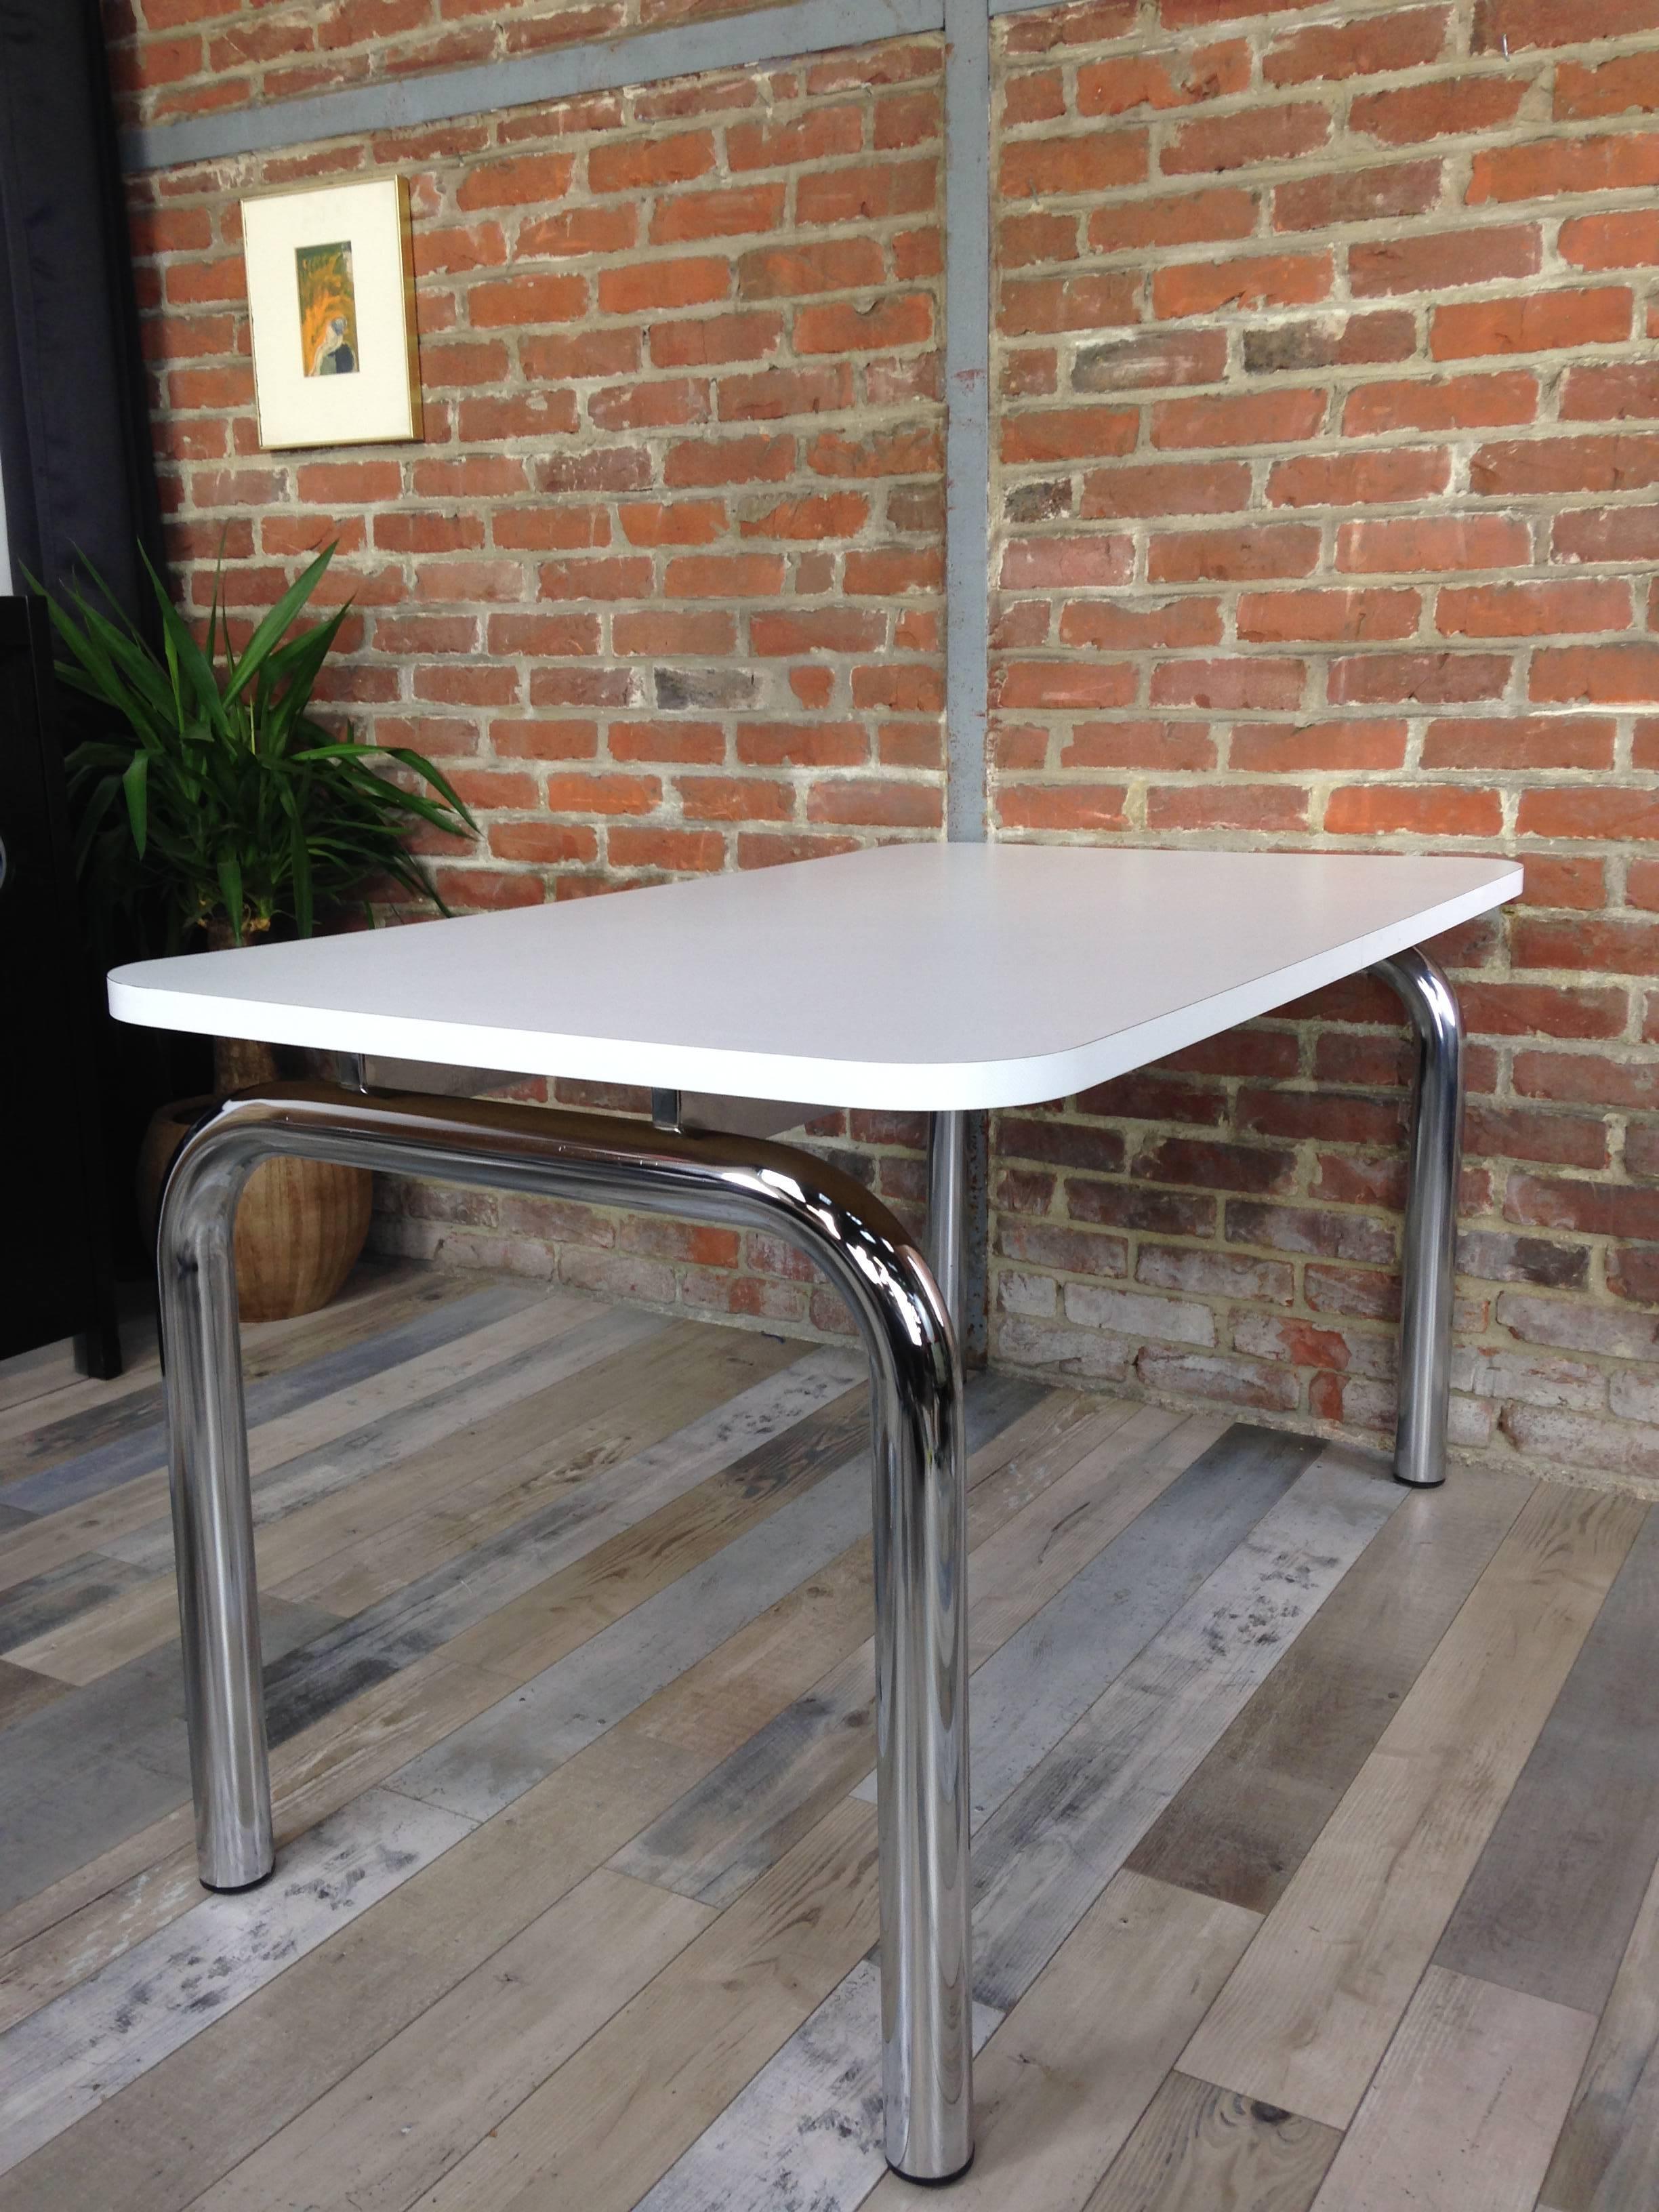 Dutch Design Of The 60's Chrome And Formica Dining Table with chroem tubular structure ans white textured formica tray